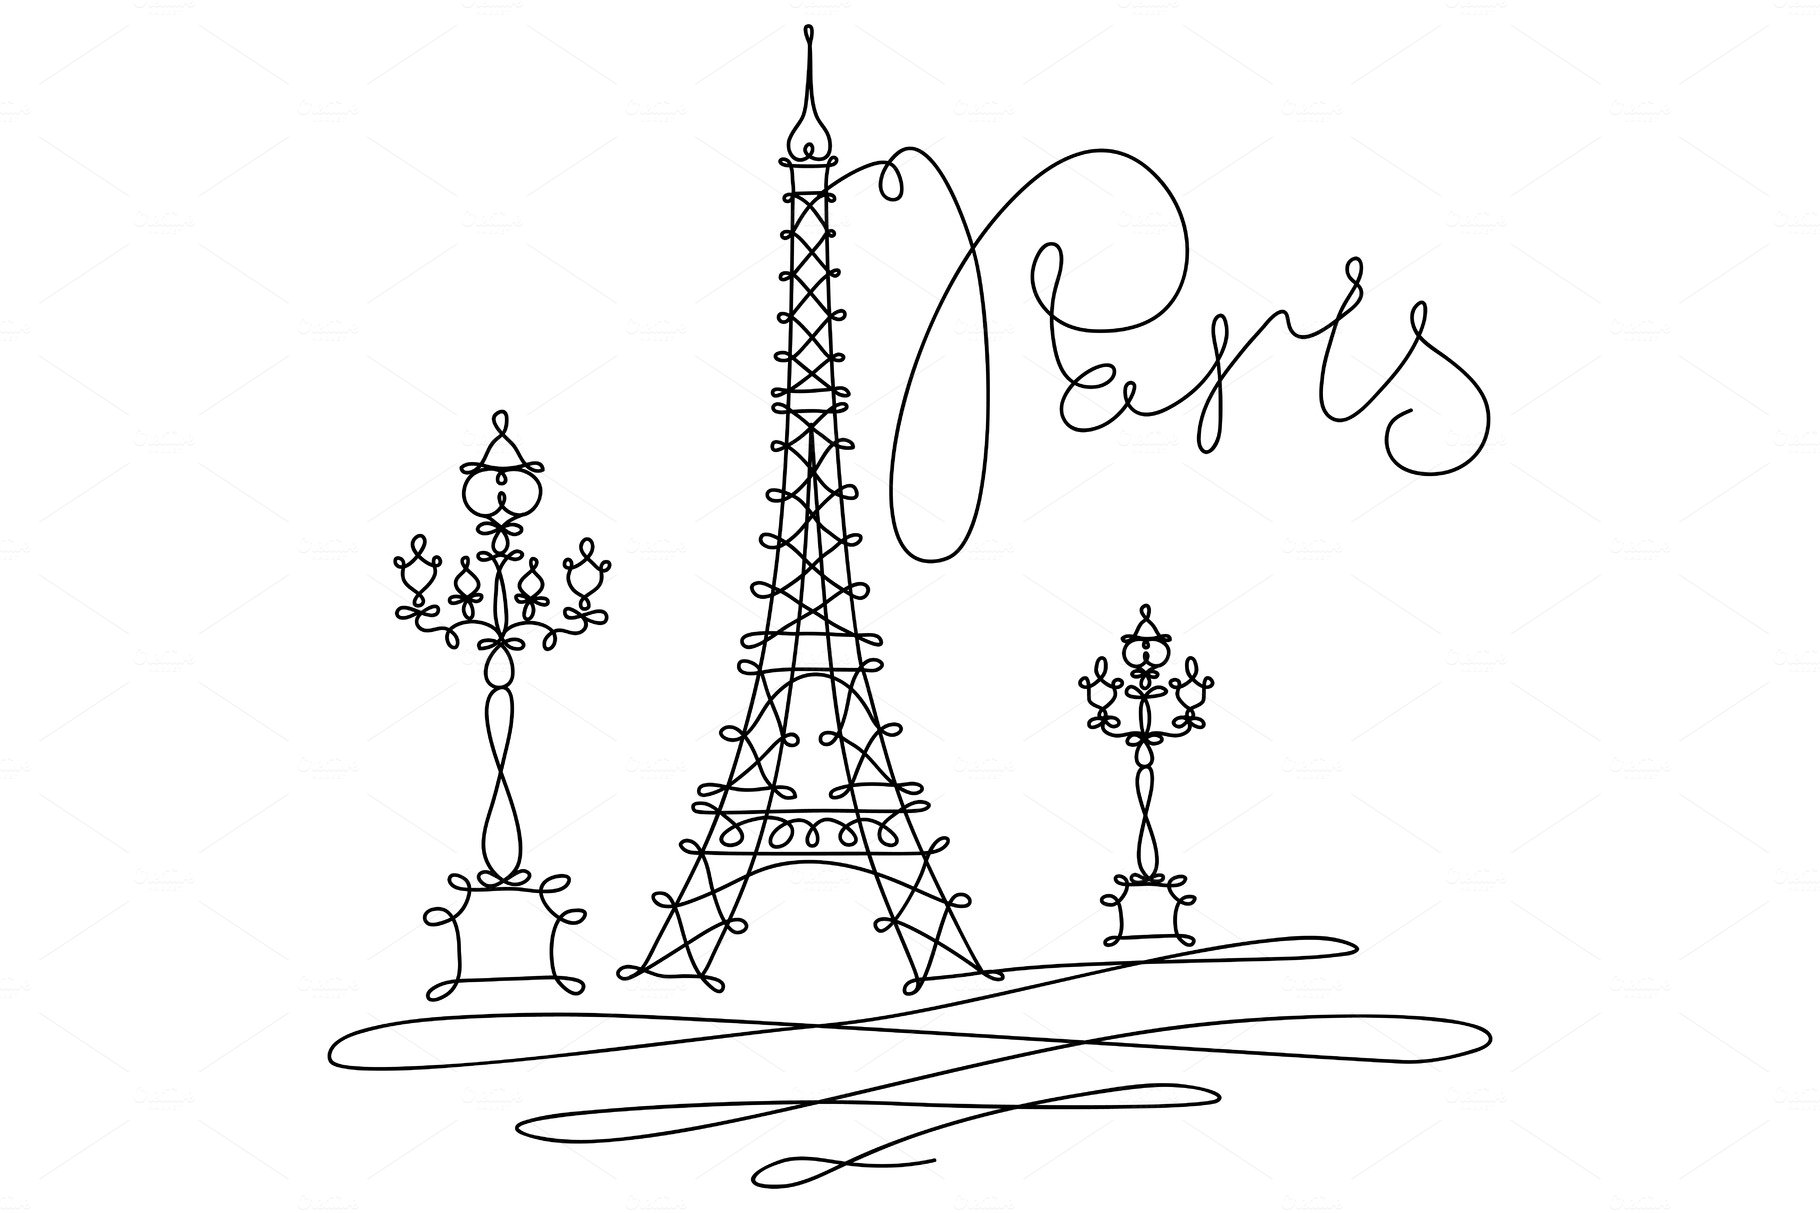 One line sketch of Eiffel tower in cover image.